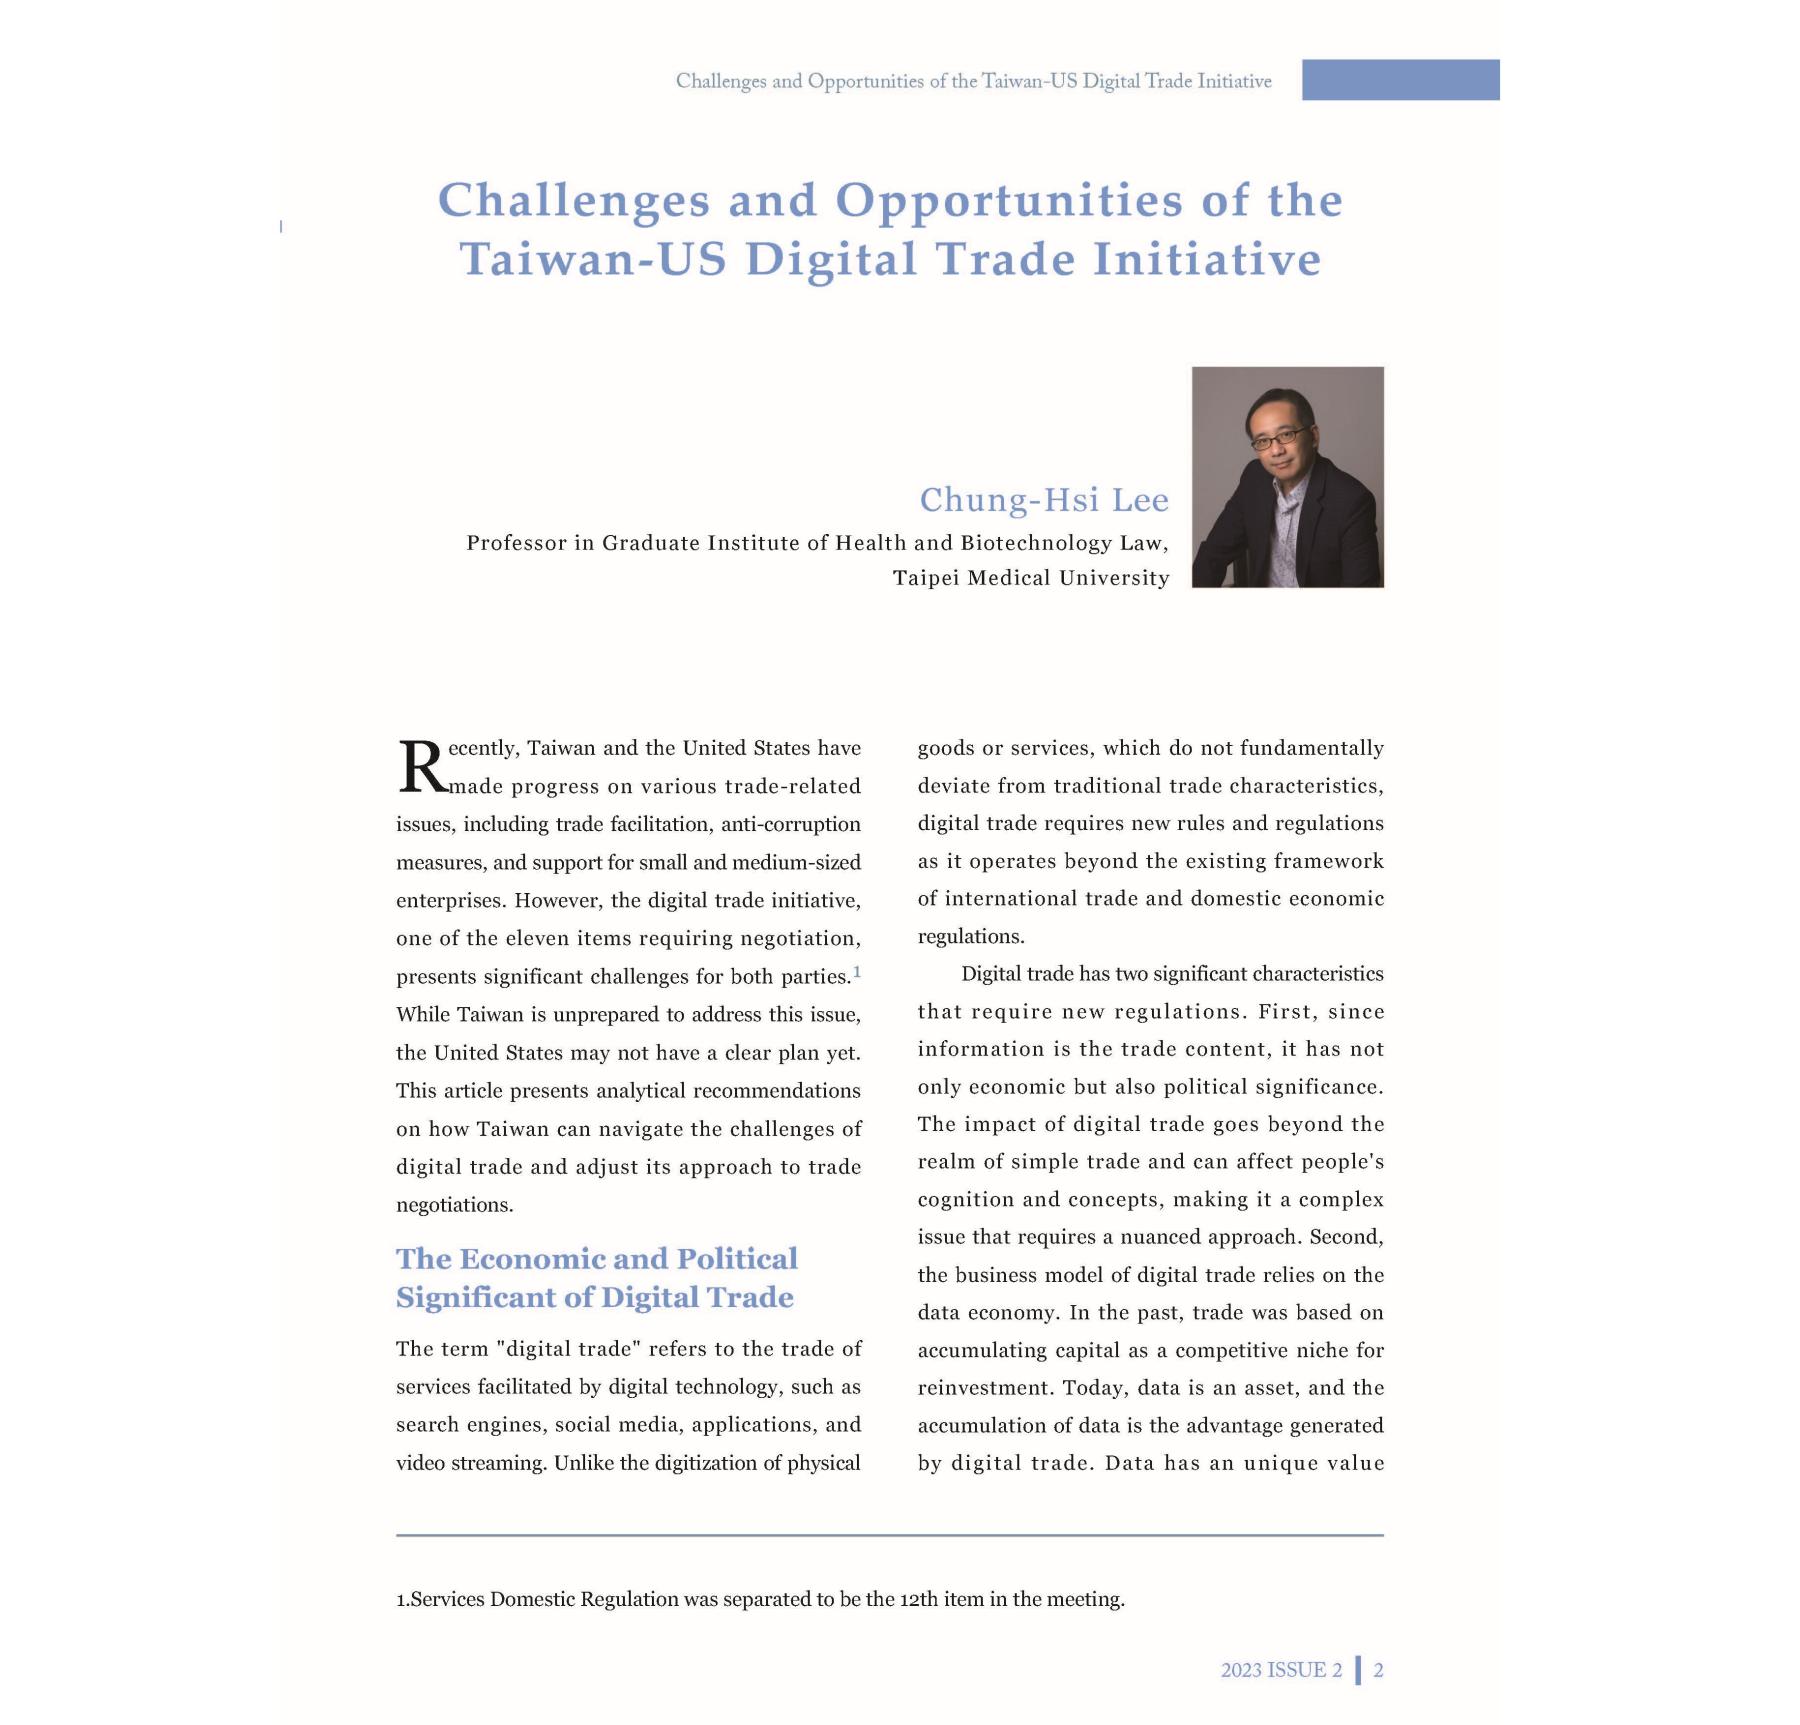 Challenges and Opportunities of the Taiwan-U.S. Digital Trade Initiative